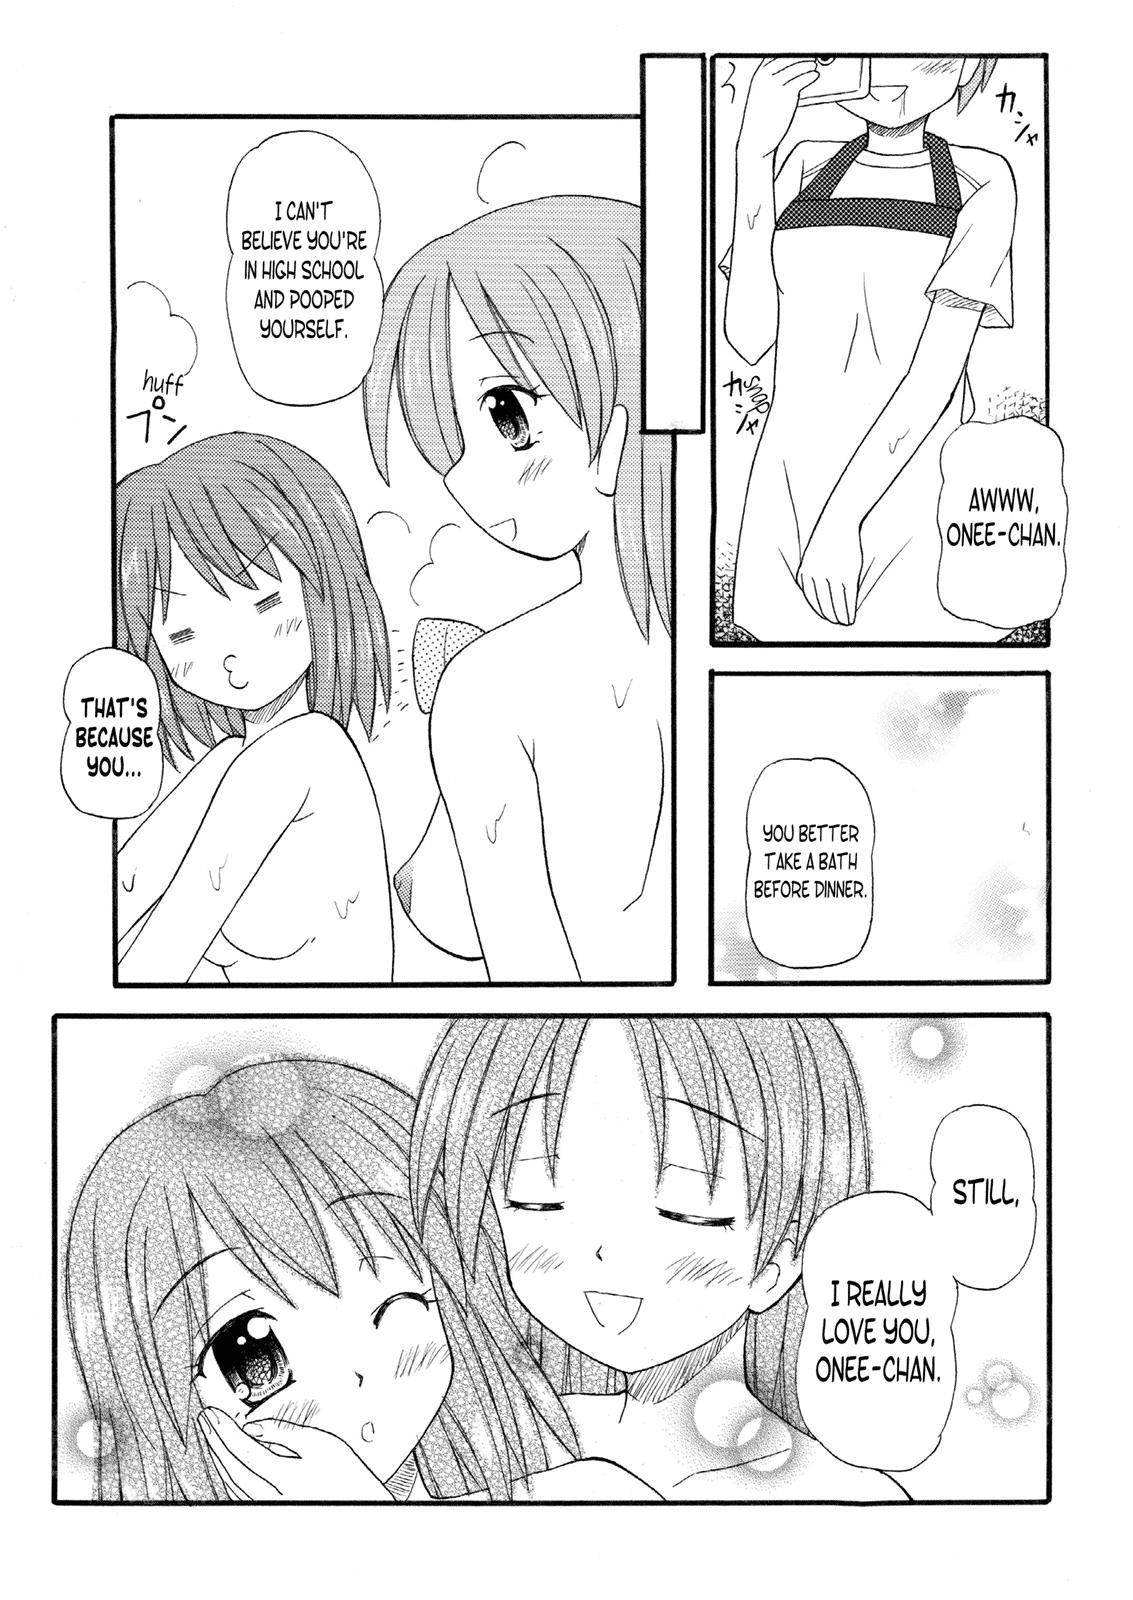 Friends Yuicon - Yui Complex - K on Submission - Page 6